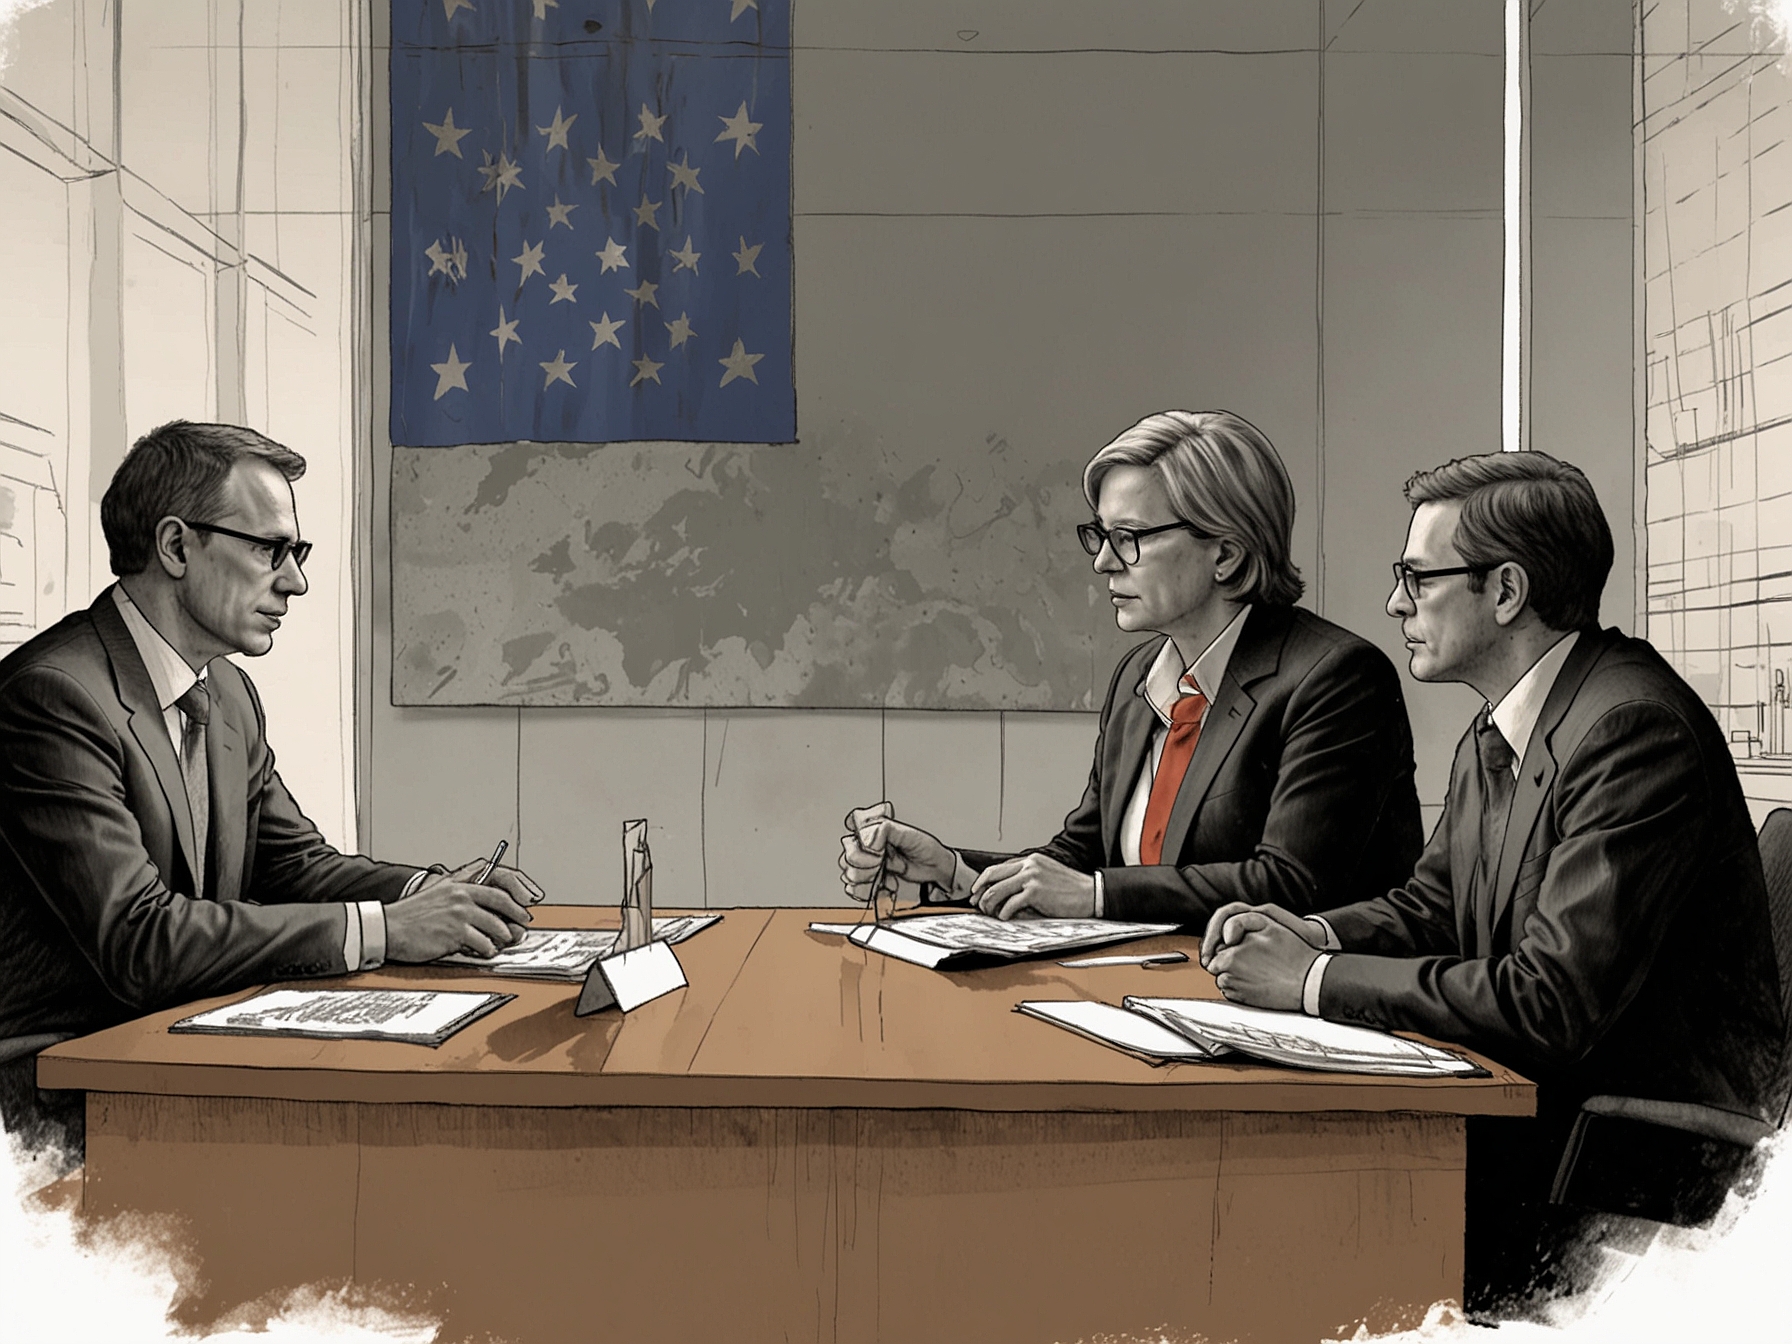 An illustration of Microsoft executives in a heated discussion, with the European Union flag in the background, symbolizing the ongoing antitrust investigation into the company's bundling practices.